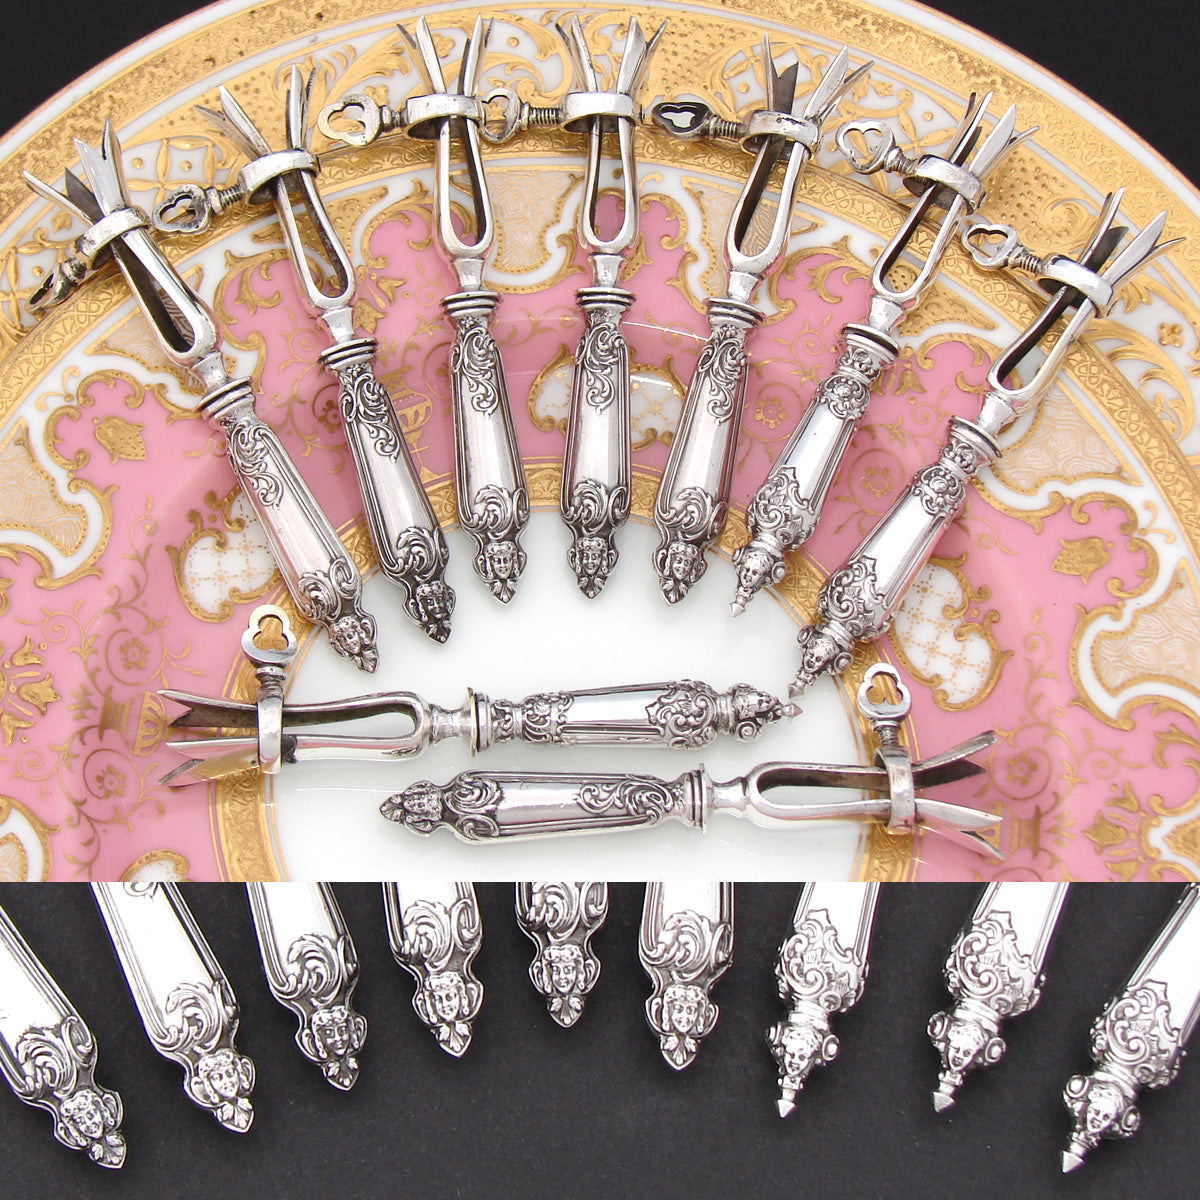 Antique French Sterling Silver 9pc Chop Gigot or "Manche á Cotelettes" Set, Figural Handles